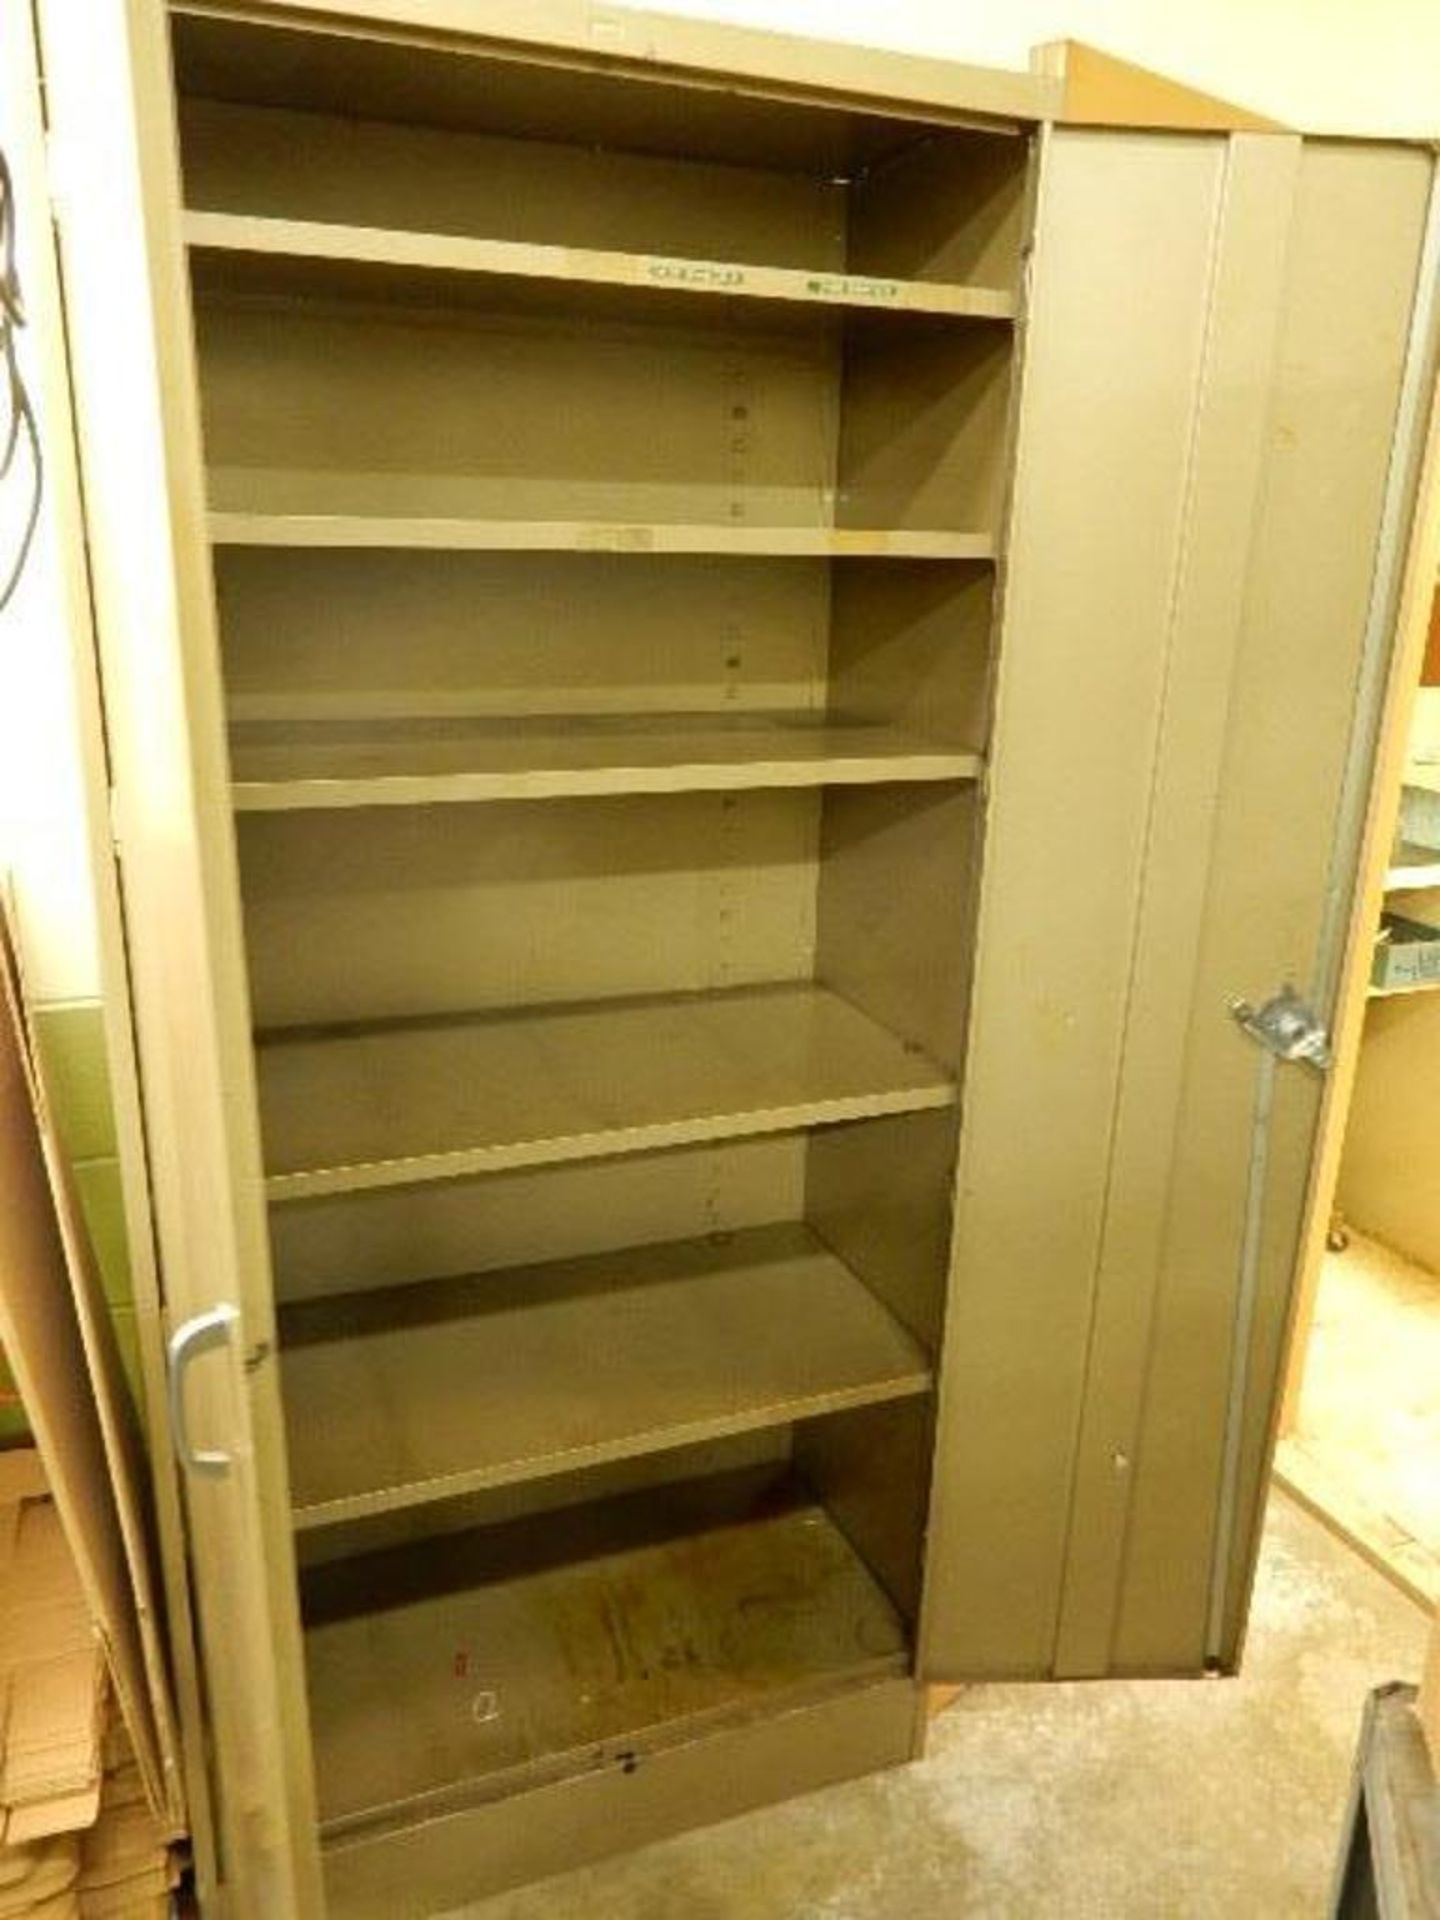 Steel Cabinet - Image 2 of 2